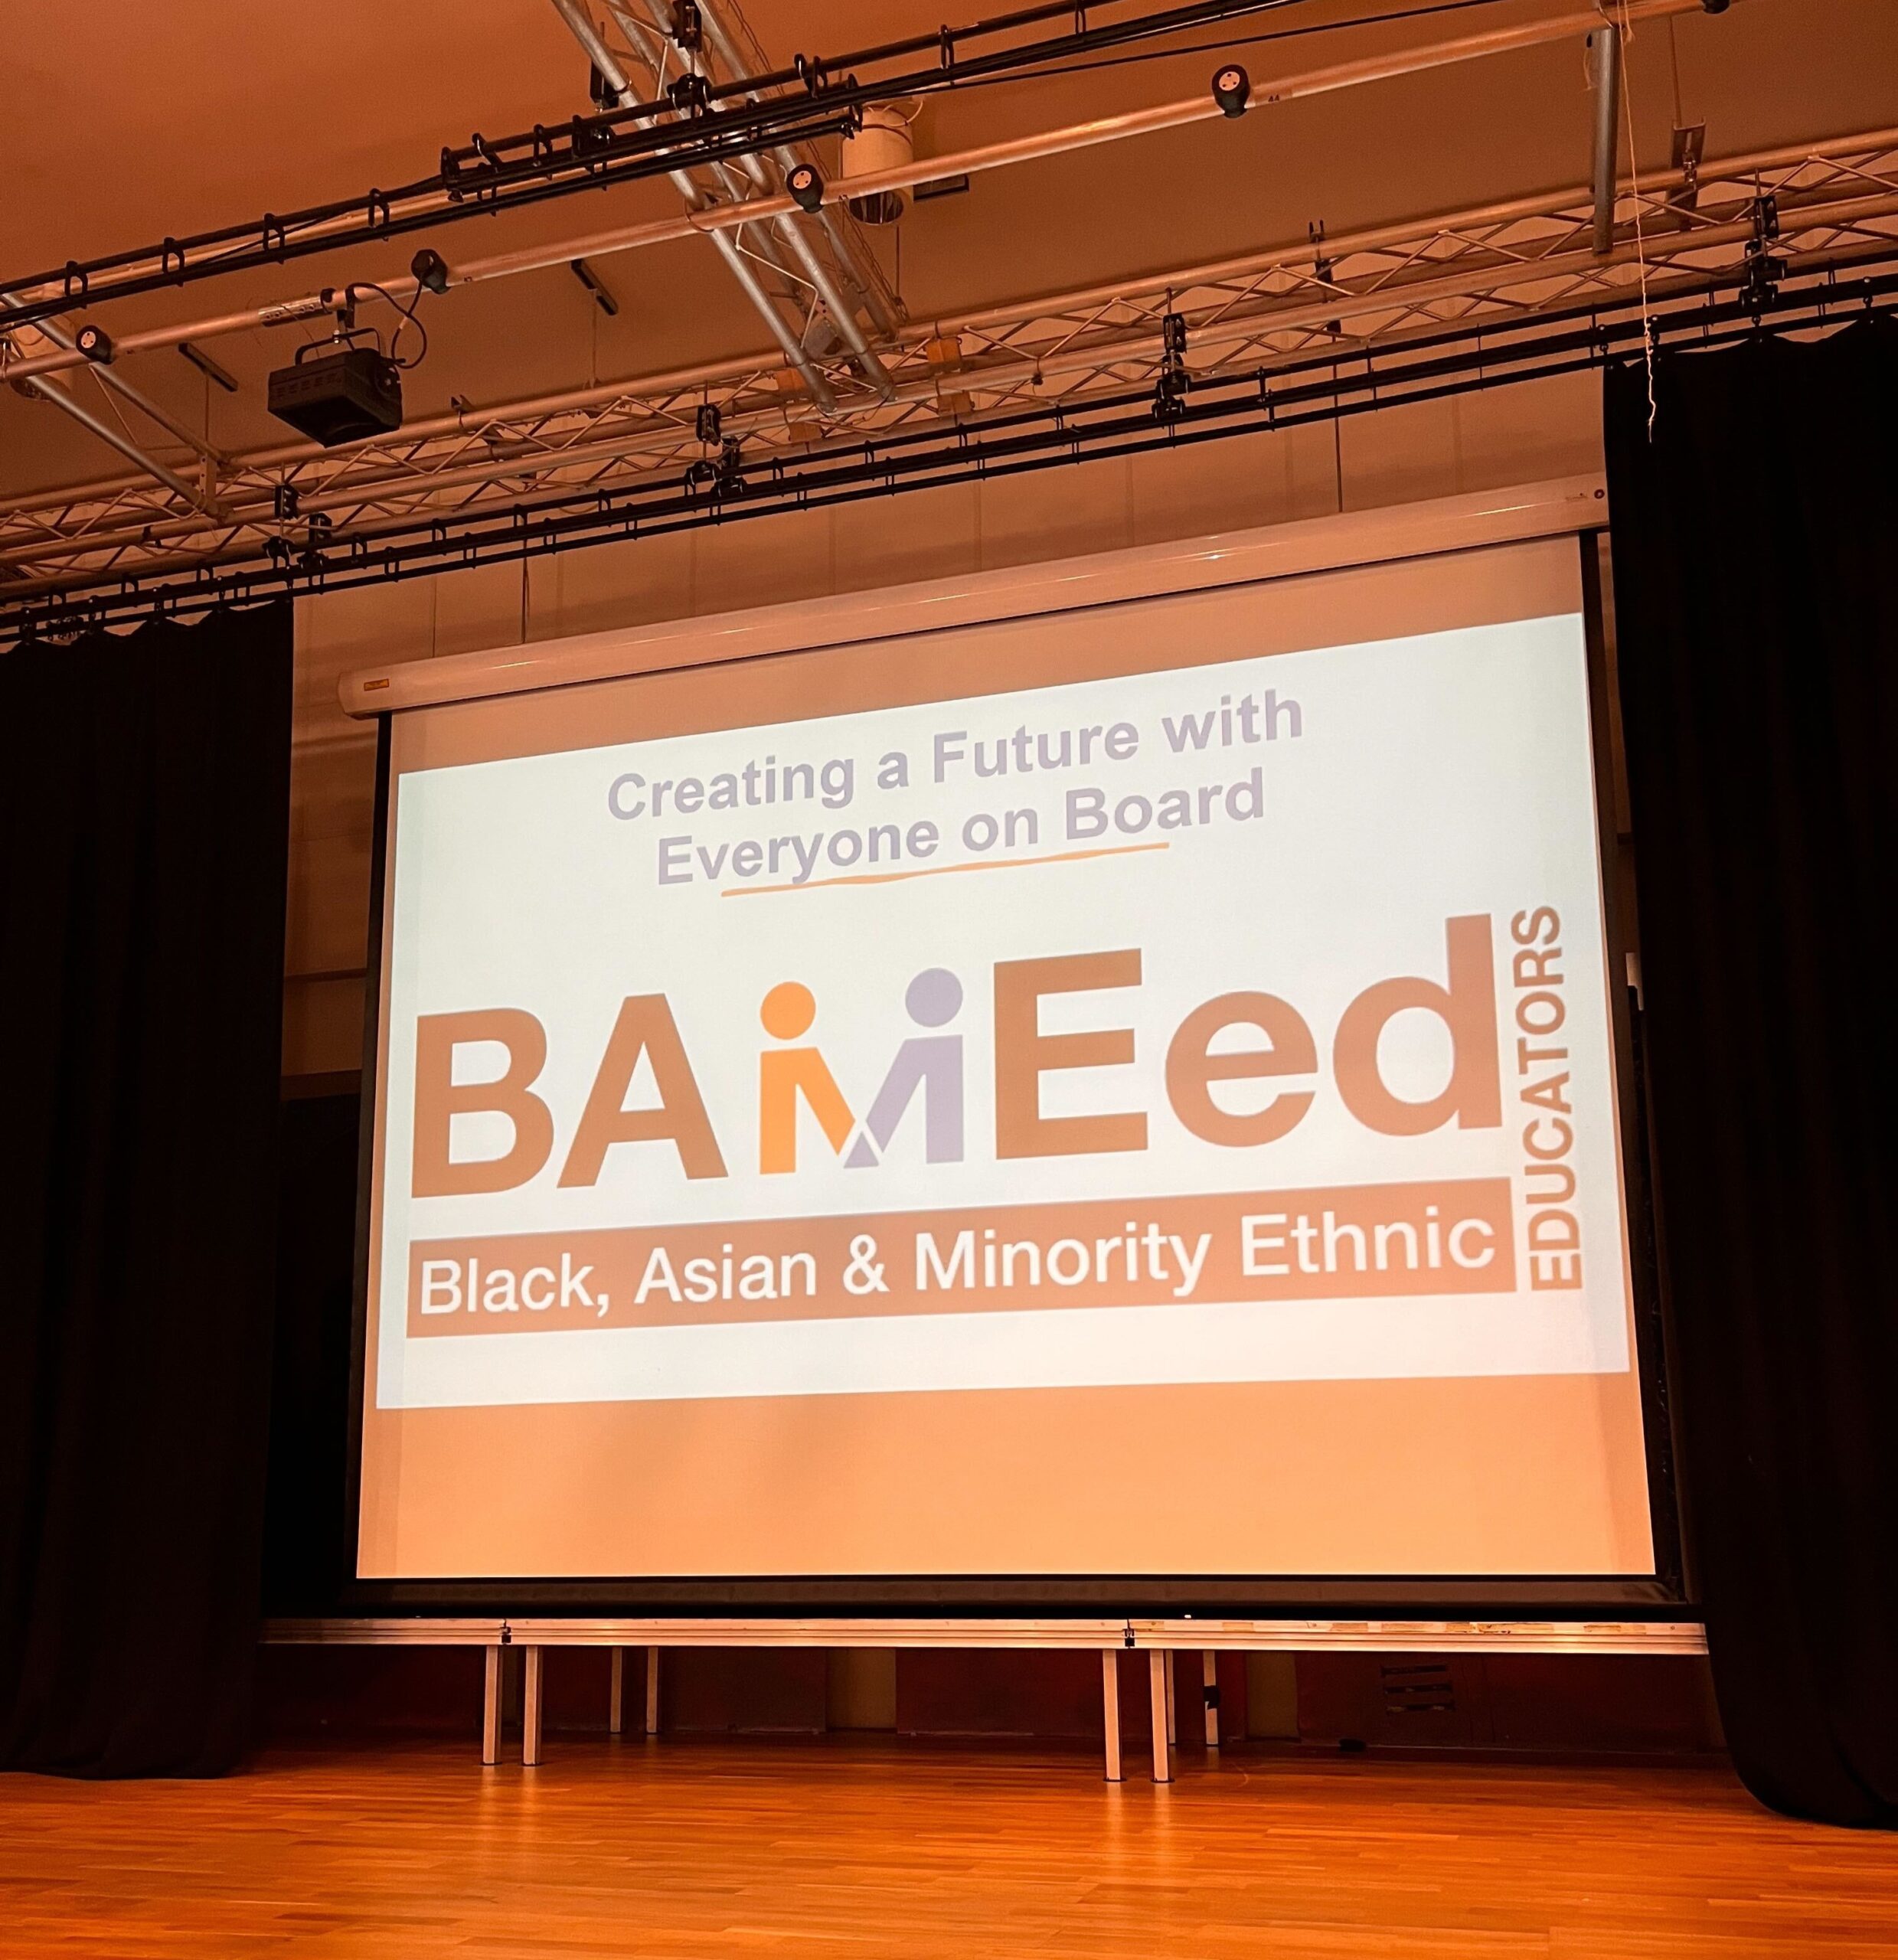 What we heard, learnt and tasted at BAMEed: Creating the future with everyone on board